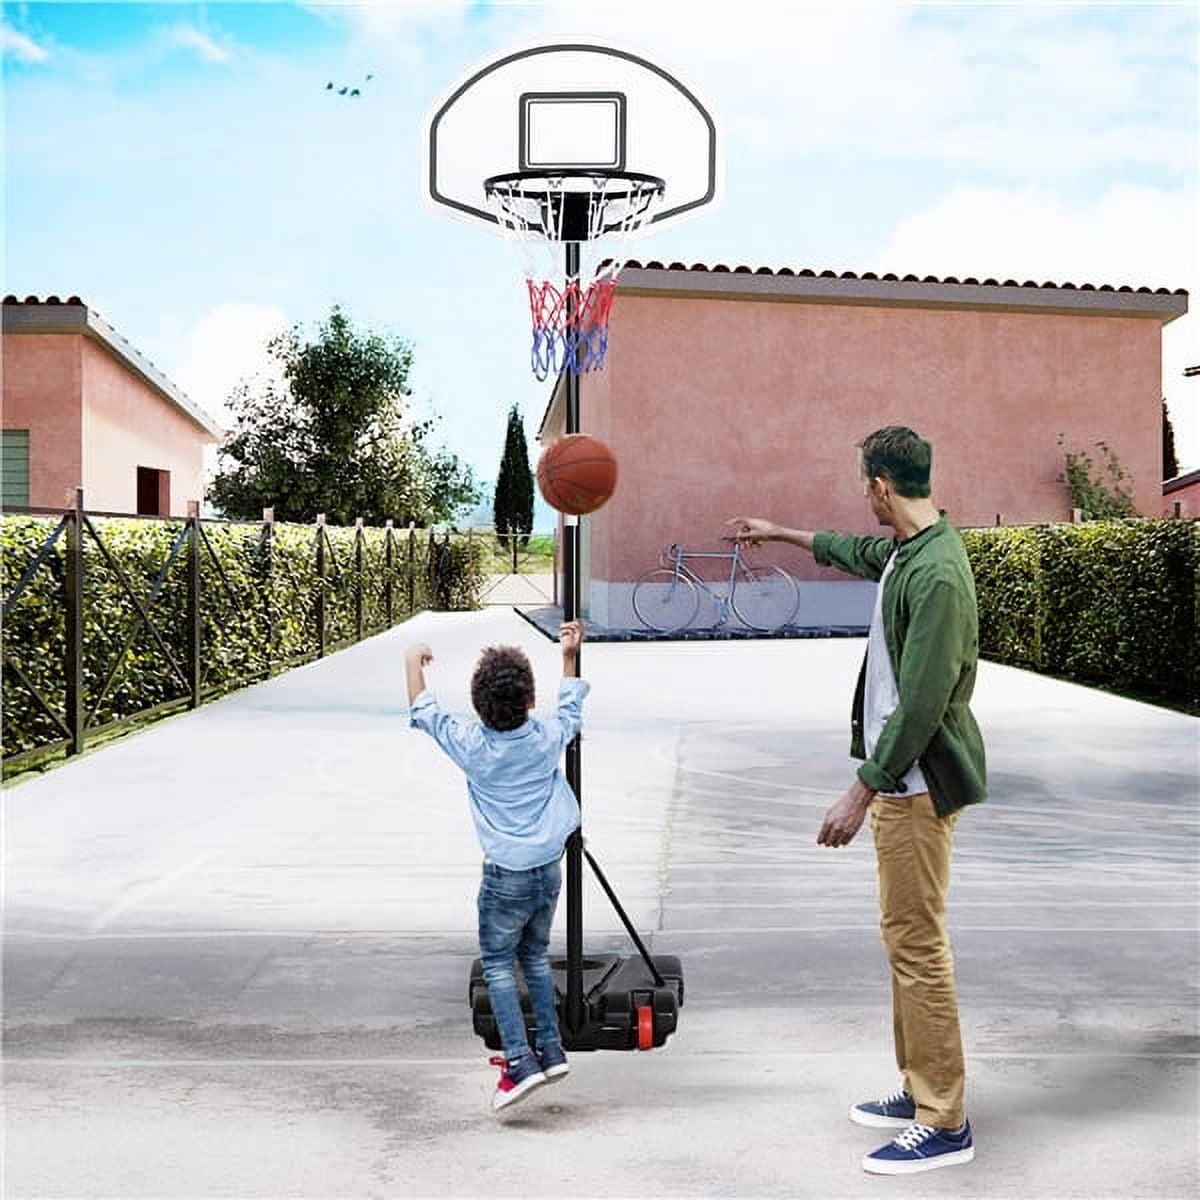 The NBA Basketball Hoop: The Official Height and NBA Rim Size - SportsRec